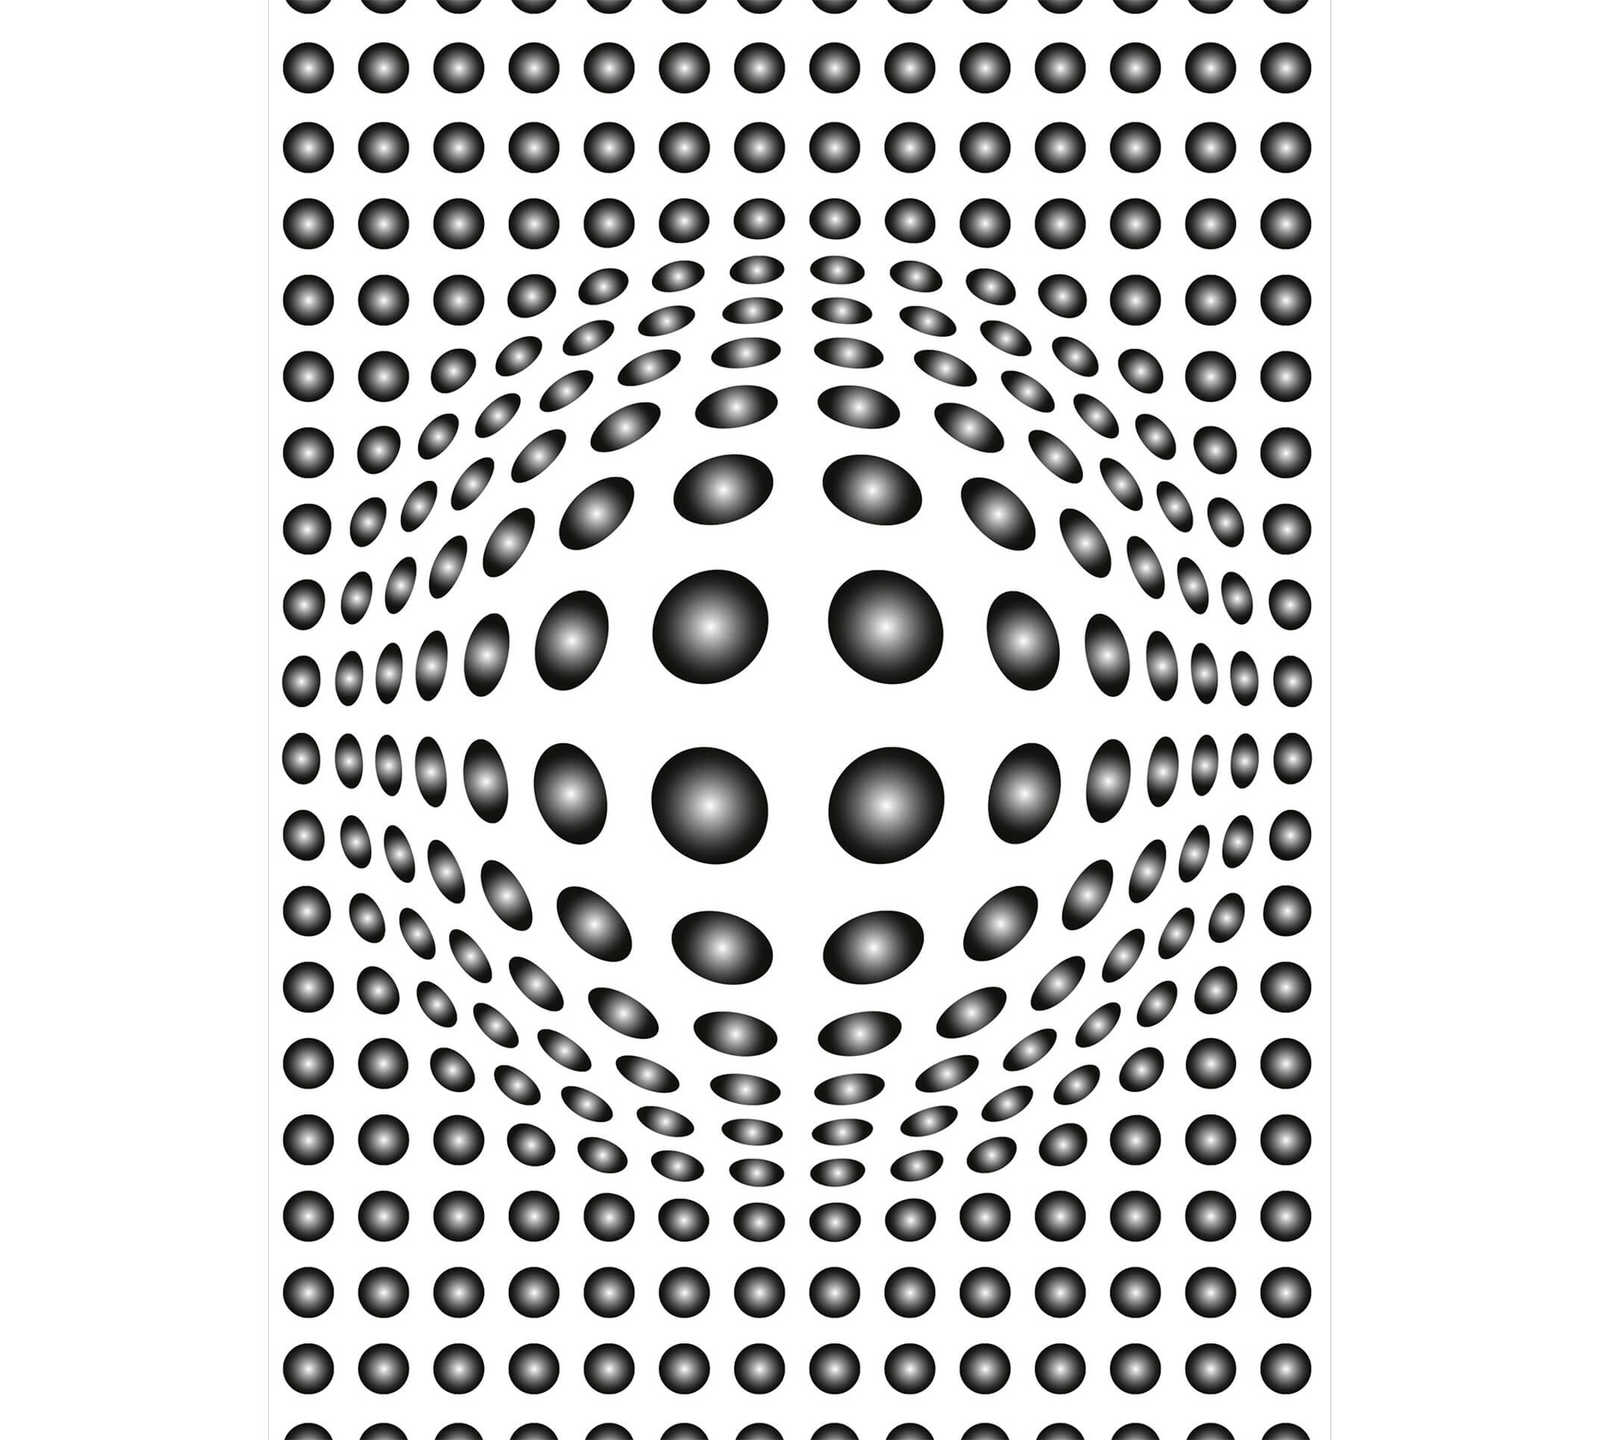         Black and white photo wallpaper with 3D dot pattern, portrait format
    